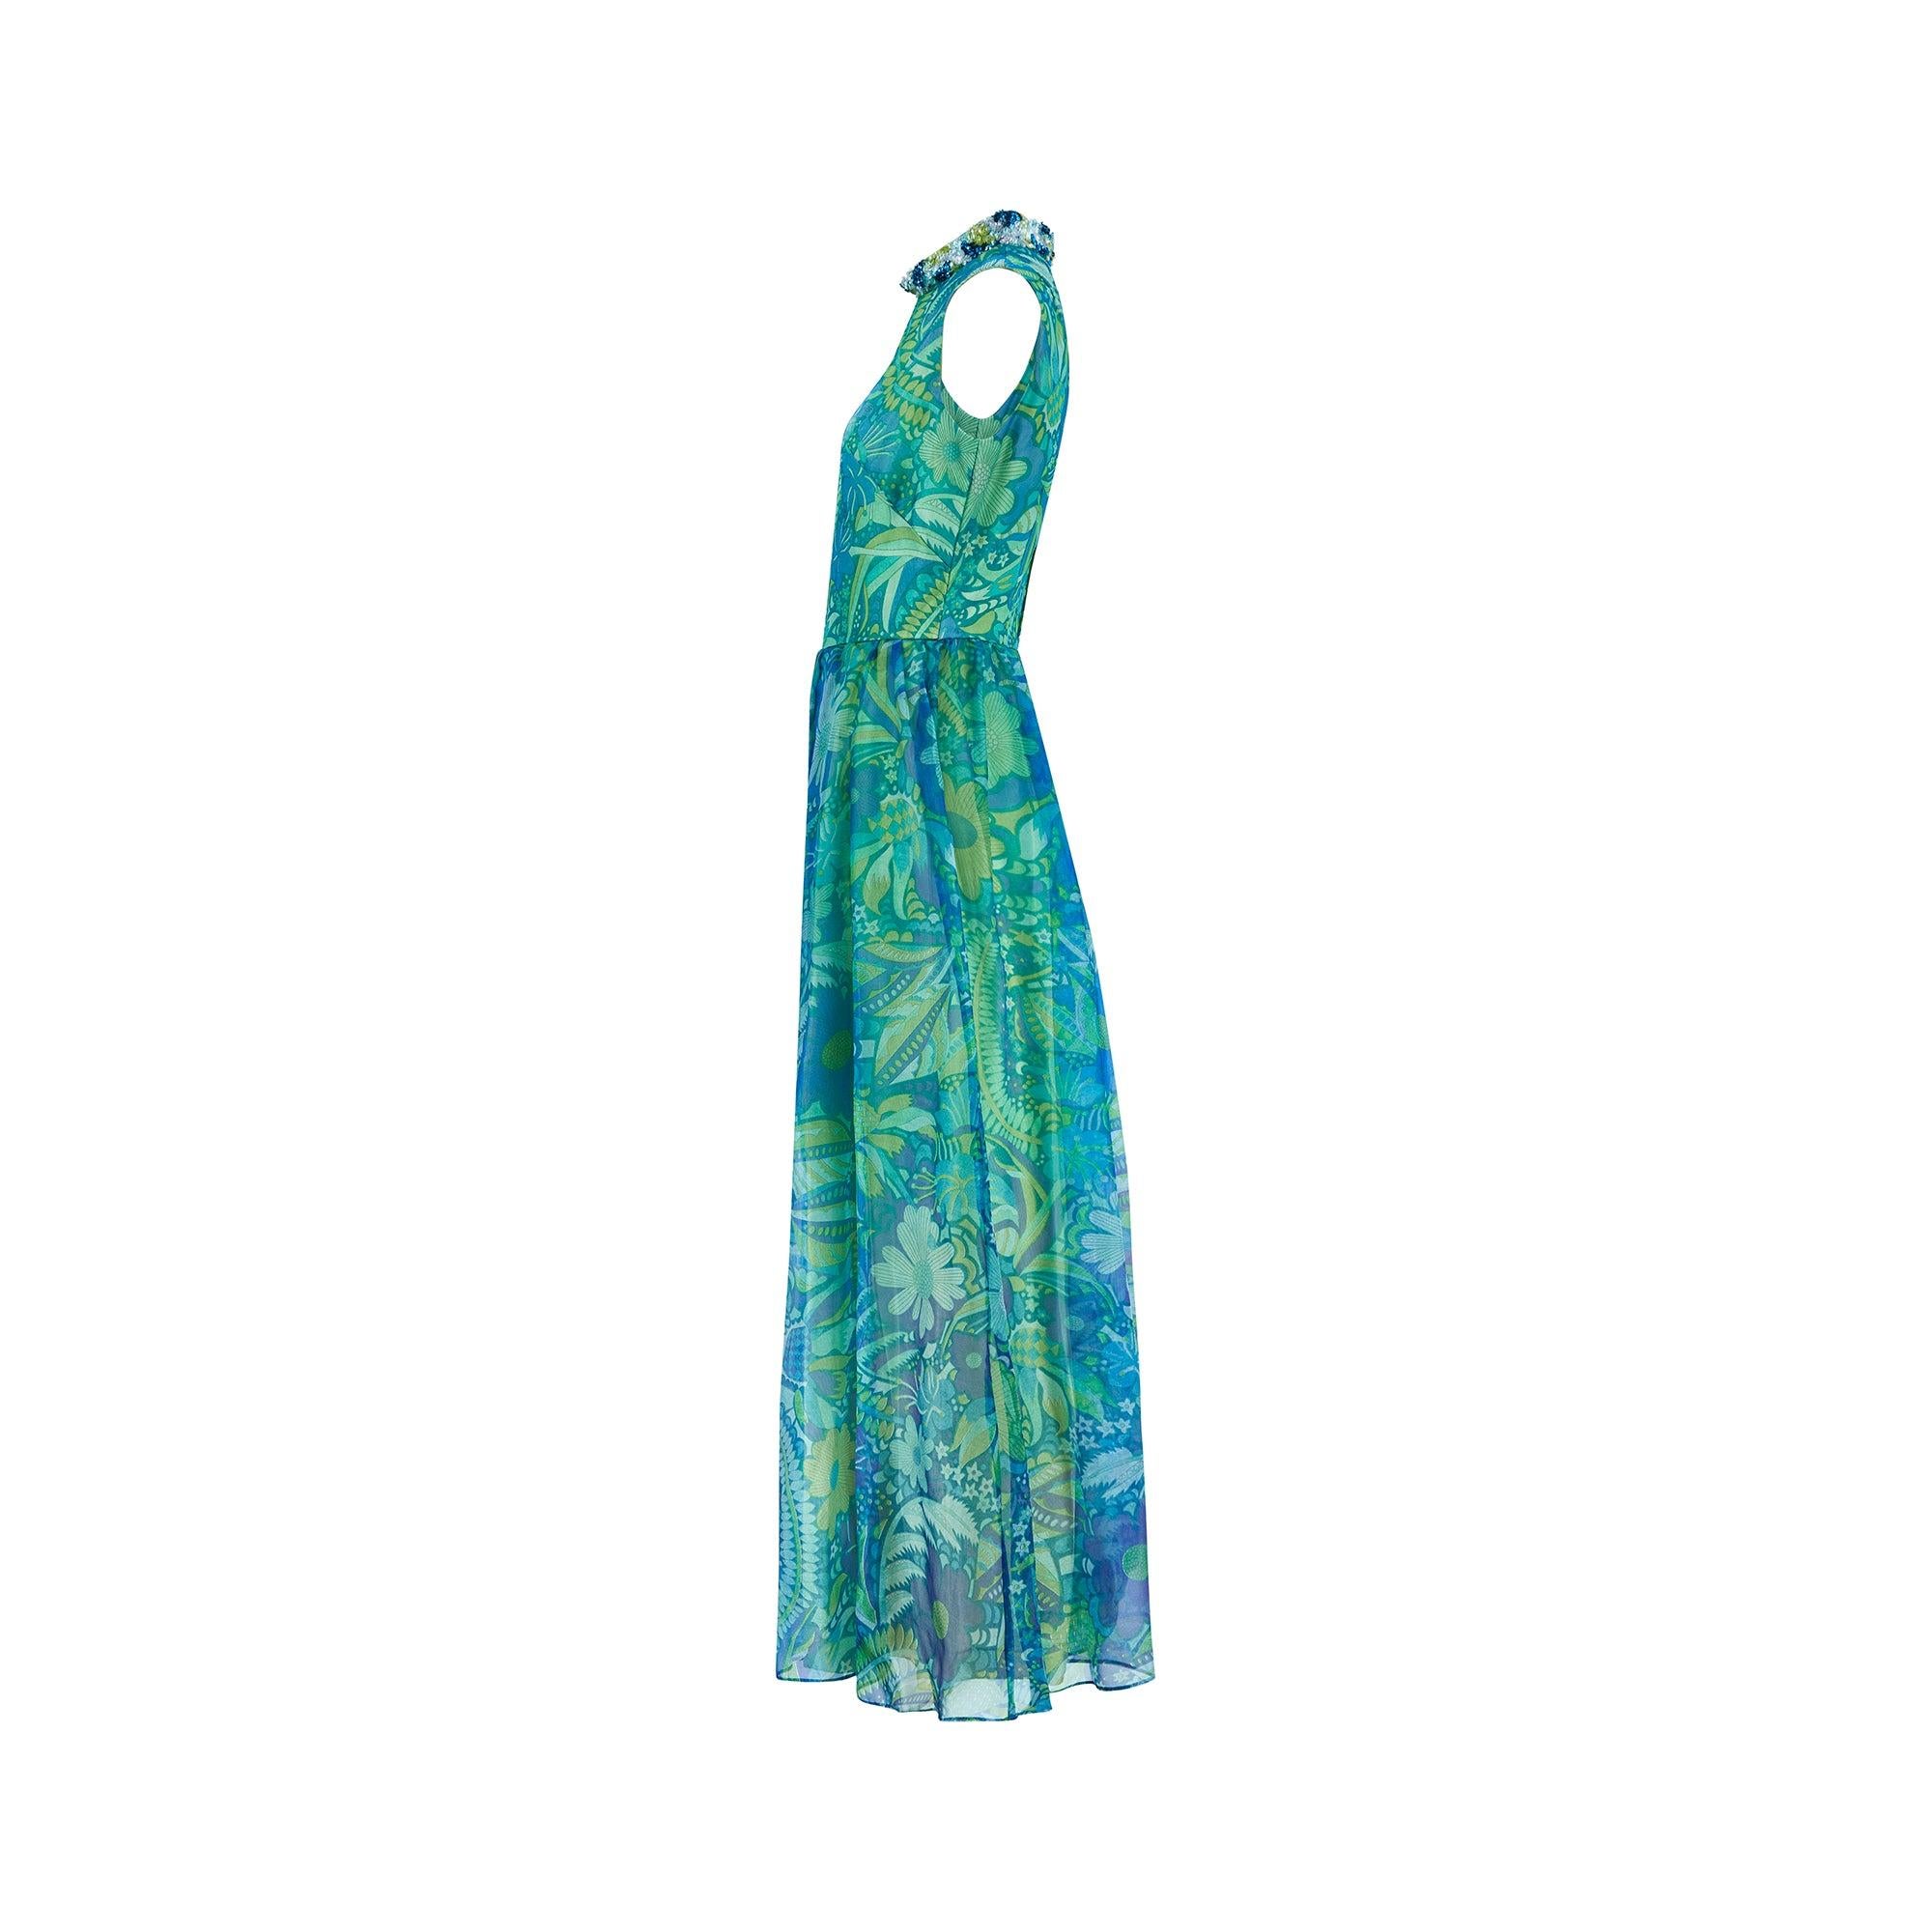 This incredible jumpsuit was created by Polmarks in the 1960s. Tailored from flowing sheer georgette printed with psychedelic florals in bright blue and green hues, this theatrical piece is cut to an extreme wide-leg silhouette. The high collar is